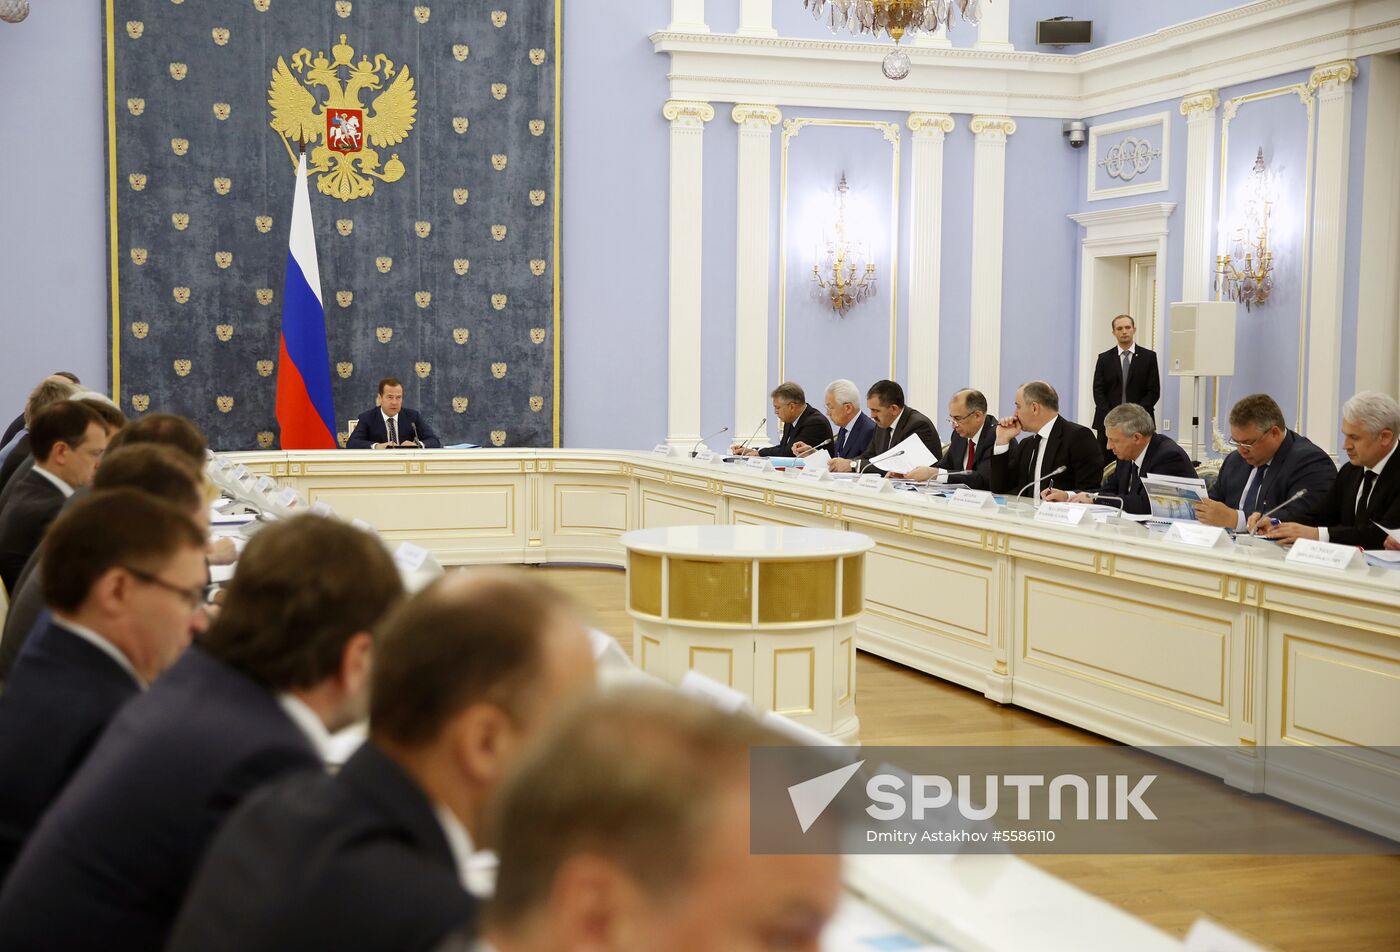 Prime Minister Dmitry Medvedev holds meeting on North Caucasus Federal District's socioeconomic development